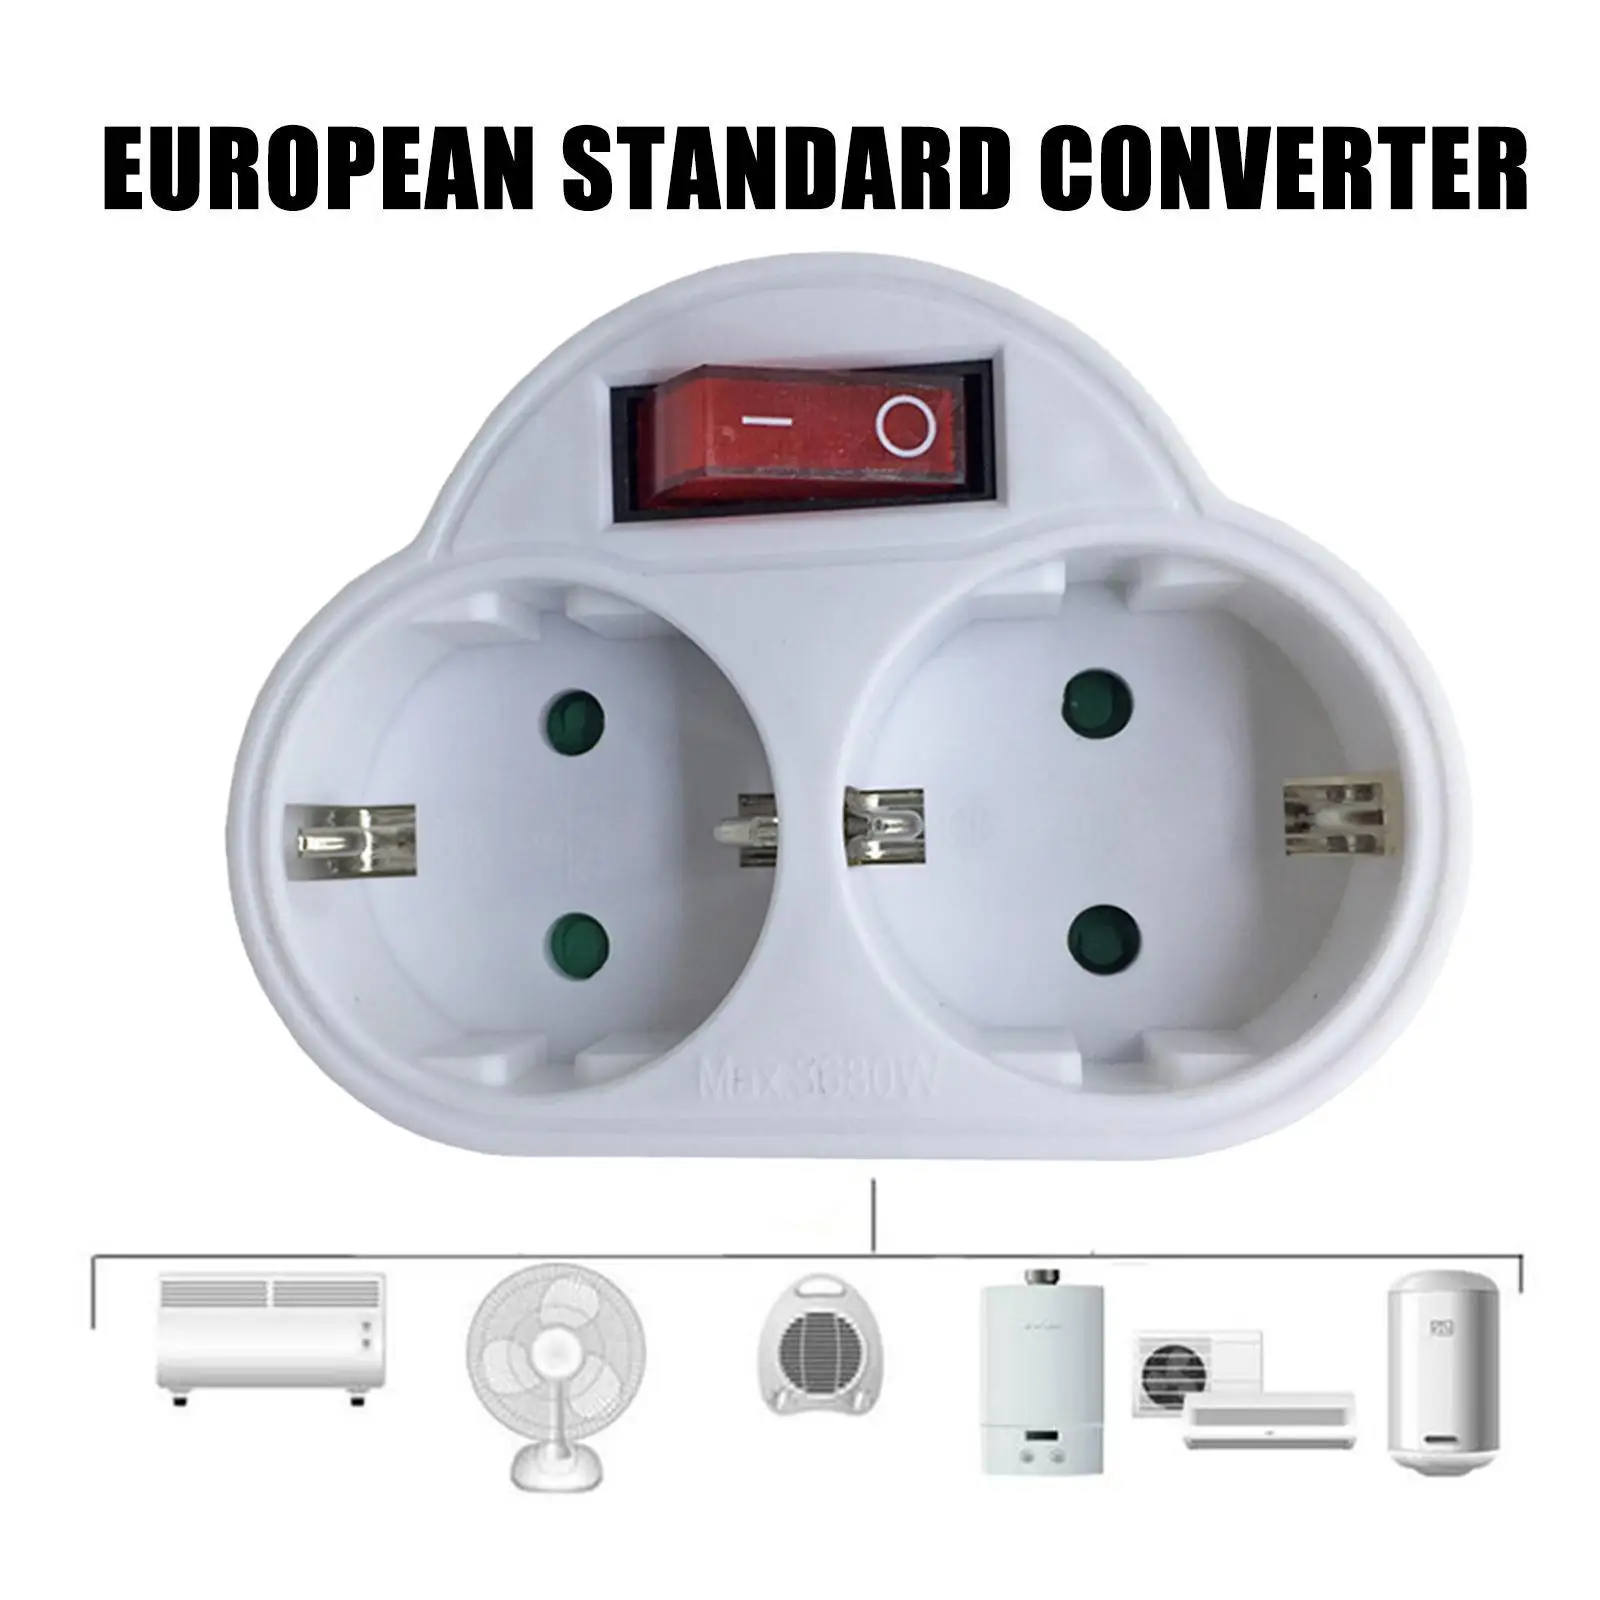 

Durable Eu Standard Multiple Plug 250v 16a Double Socket Conversion Socket Plug Power Switch Outlet Adapter Socket With C6n9